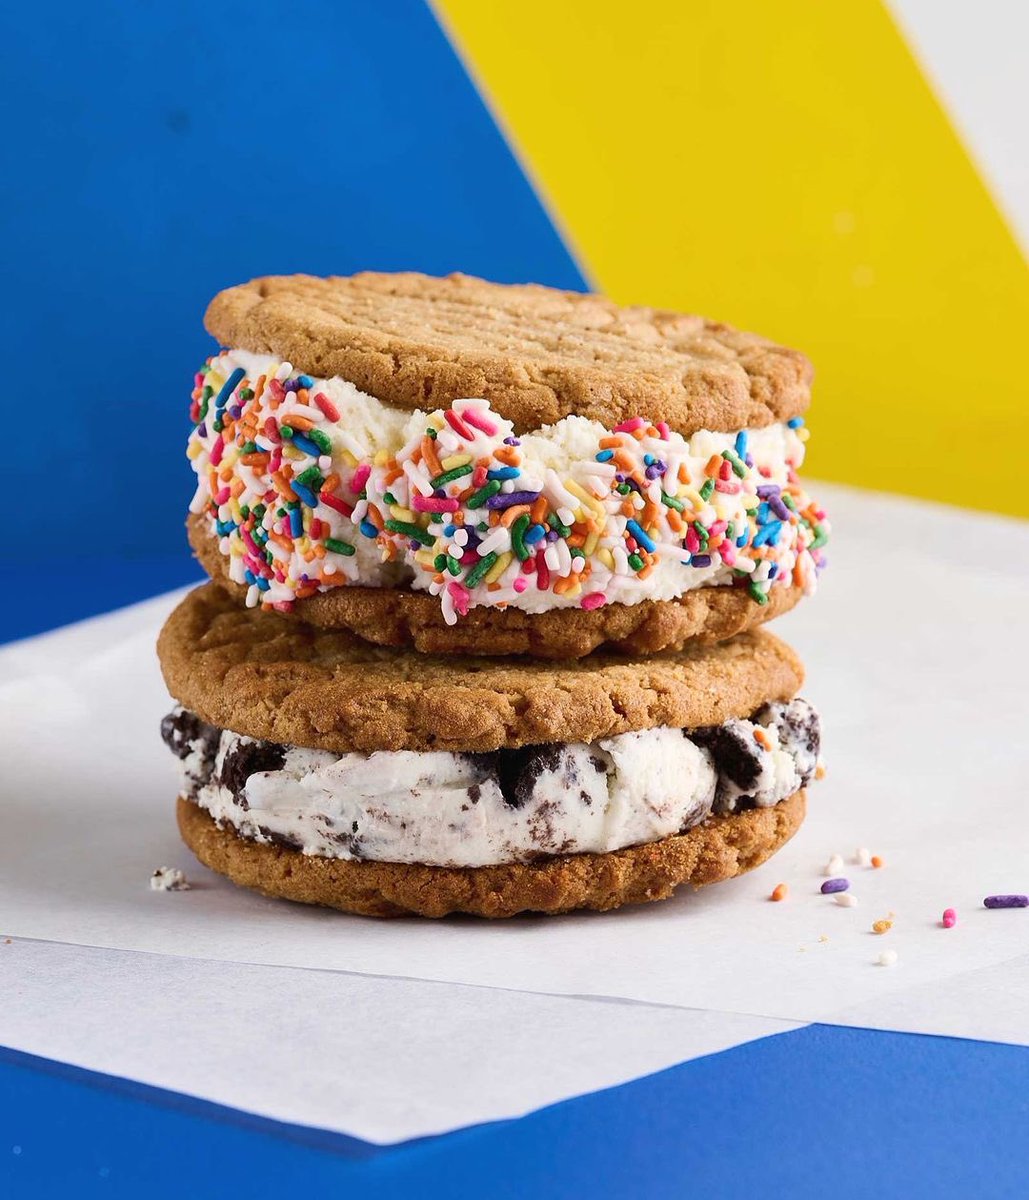 🍪🍦 Dive into the ultimate treat at Captain Cookie & the Milk Man! 🌟 Mix any two of our homemade cookies with local ice cream for the EPIC ice cream sandwich experience! 😍👌 Can’t decide? Try a half sandwich with any flavor – endless options await! 🎉